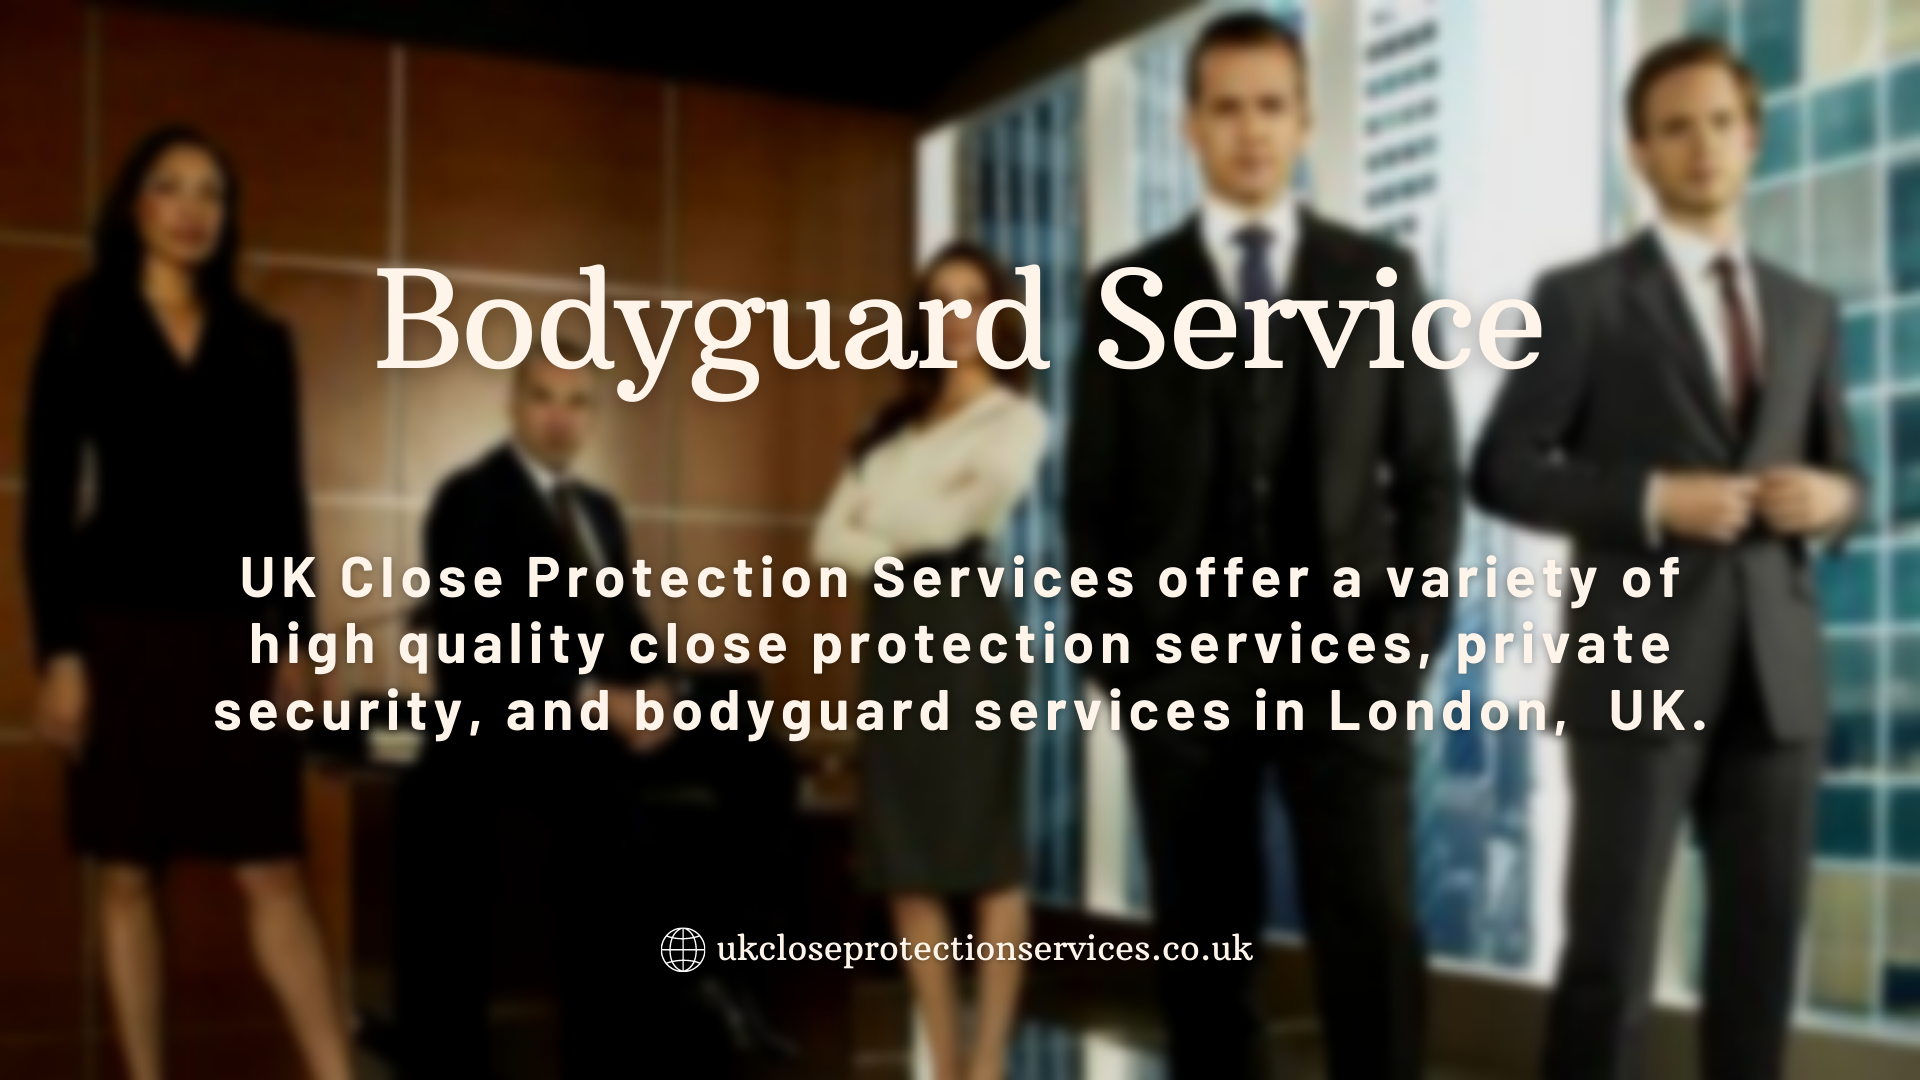 Professional bodyguards must not ignore first aid